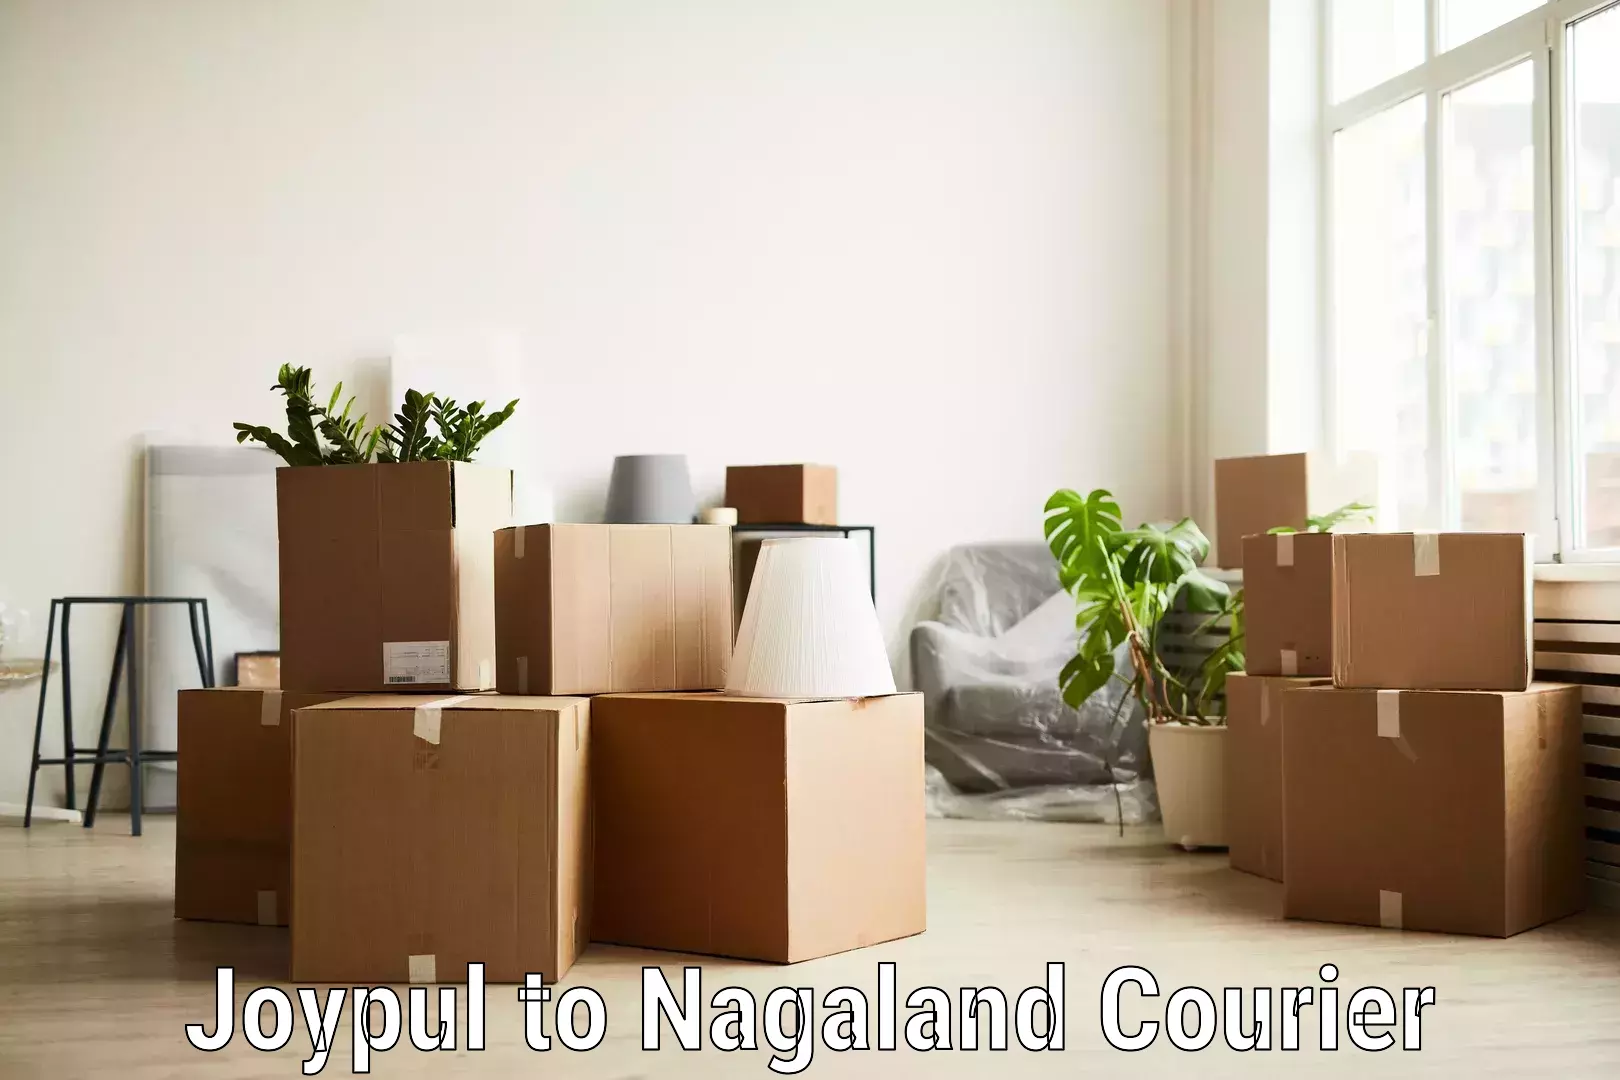 Express delivery network Joypul to Nagaland